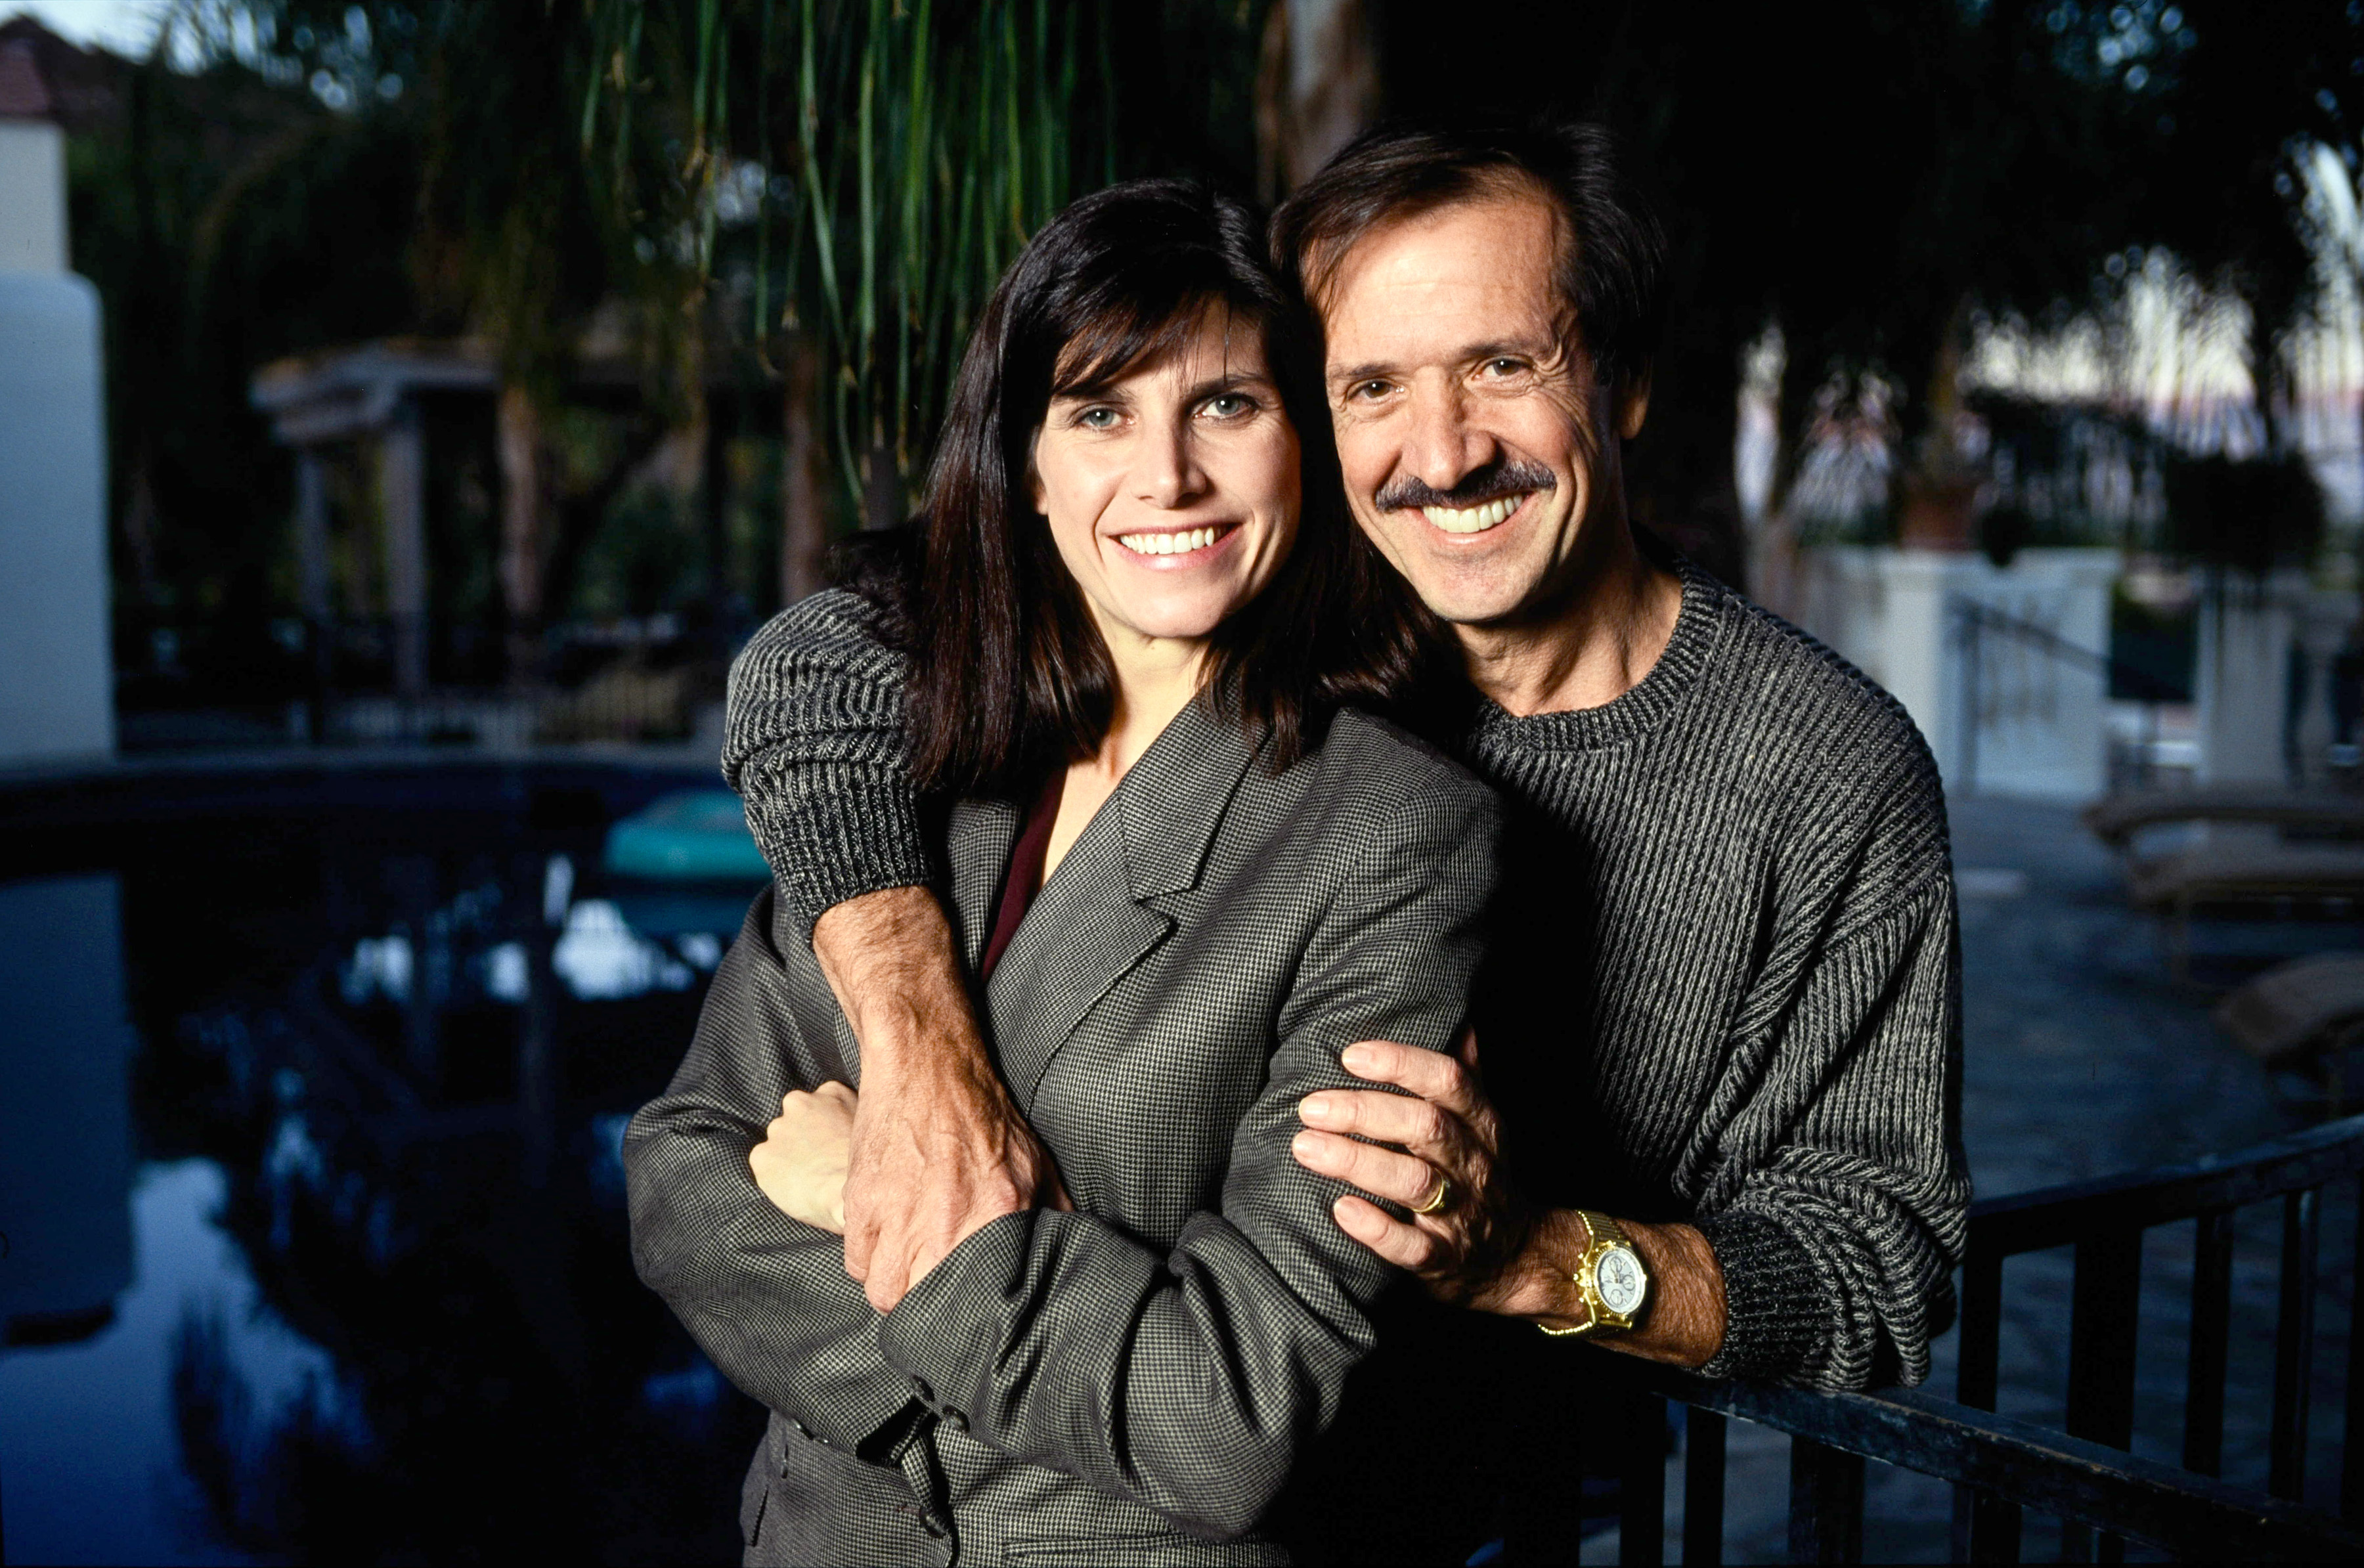 Sonny Bono and his 4th wife Mary Whitaker on January 1, 1991 in California | Source: Getty Images